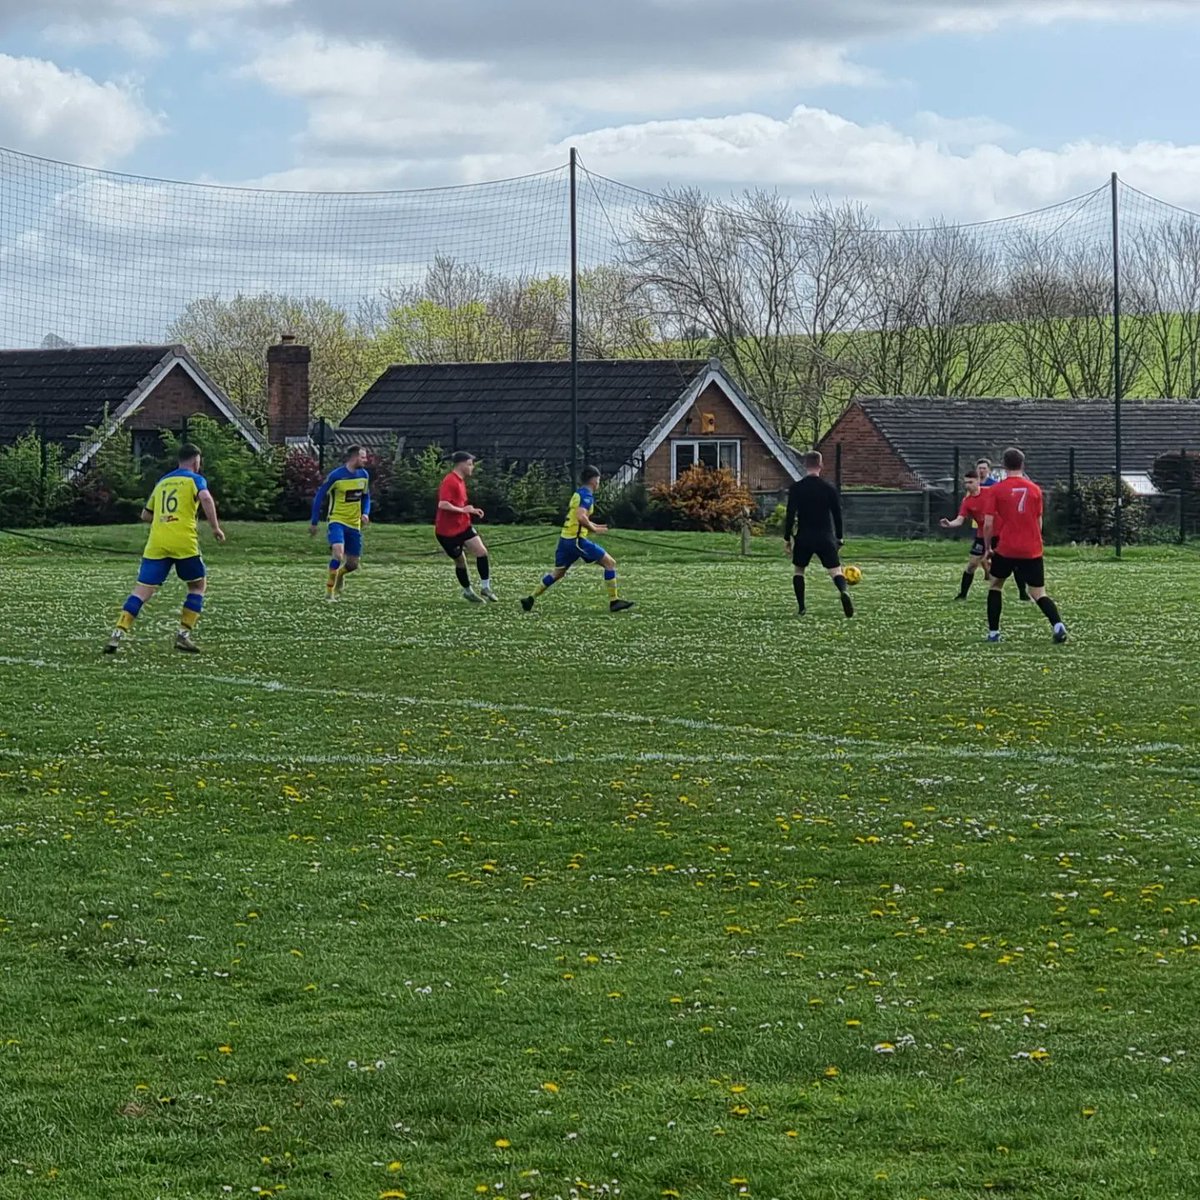 A few picks from today's 4 v 3 defeat to tupton. 
After going 4 v 1 down the Courage FC lads did well to get back in the game but it wasn't to be today! ⚽️
#couragefc #football #sundayleague